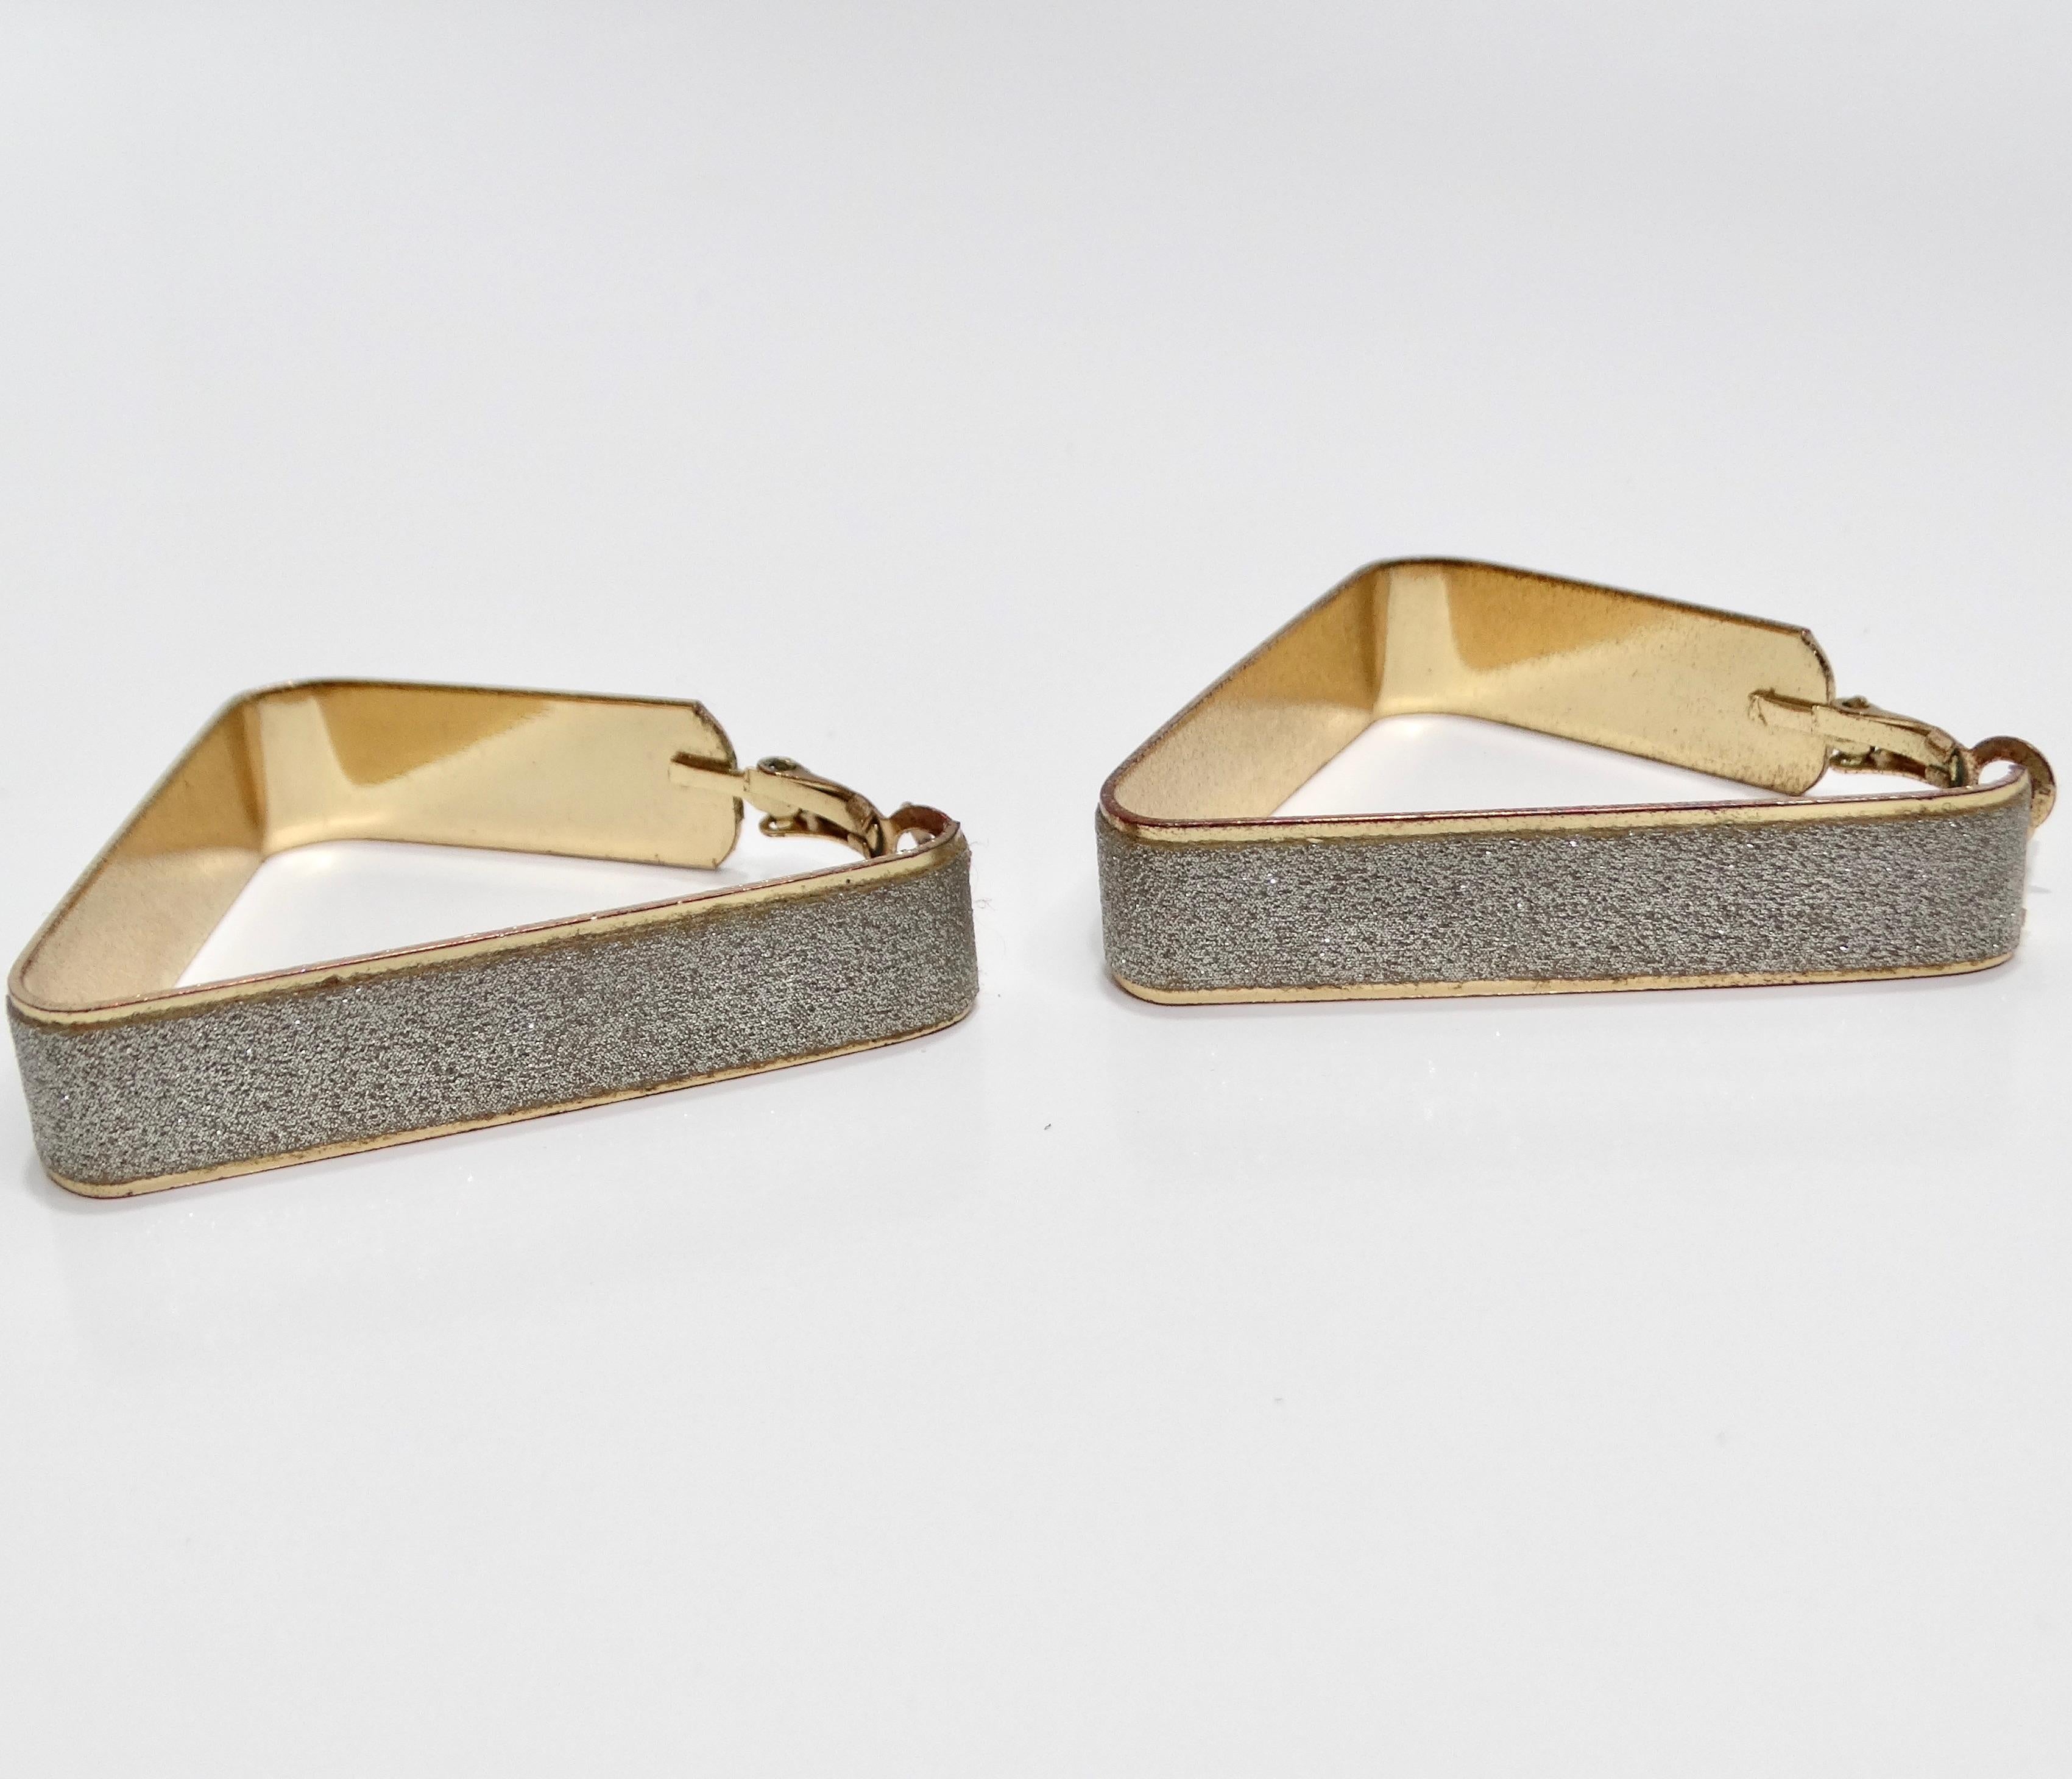 Introducing the 1980s Glitter Triangle Hoop Earrings, a fun and stylish pair of vintage earrings that capture the bold and energetic spirit of the 1980s. These unique geometric hoop earrings are designed in the shape of a triangle, offering a modern